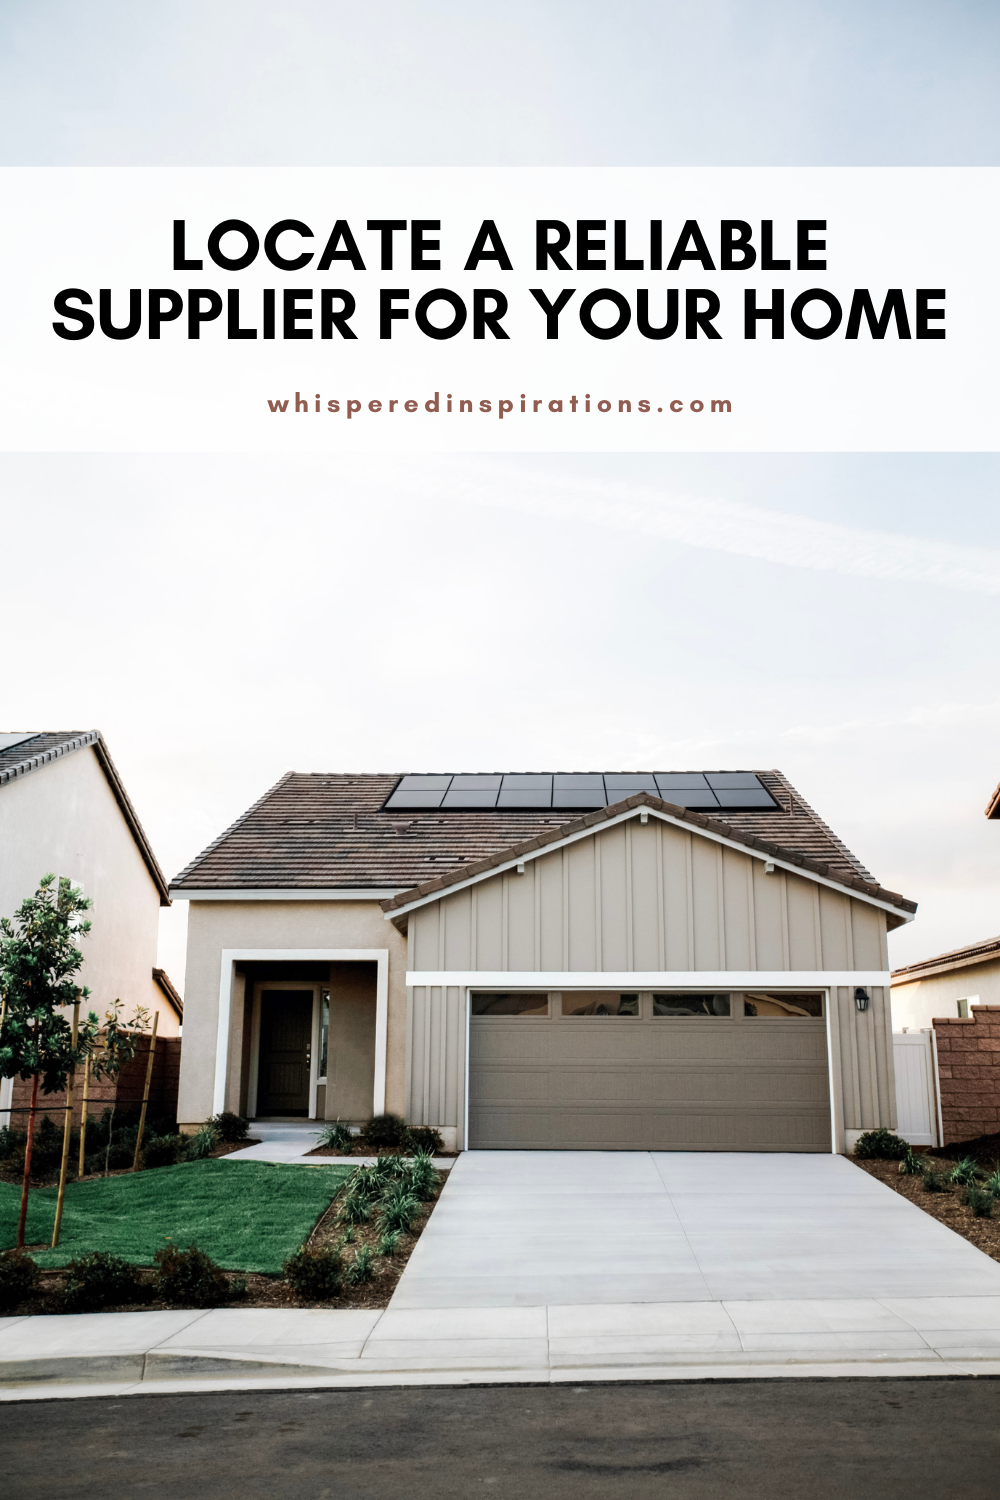 A house with solar panels on the roof is shown. This article covers how to find a reliable supplier for solar panels.